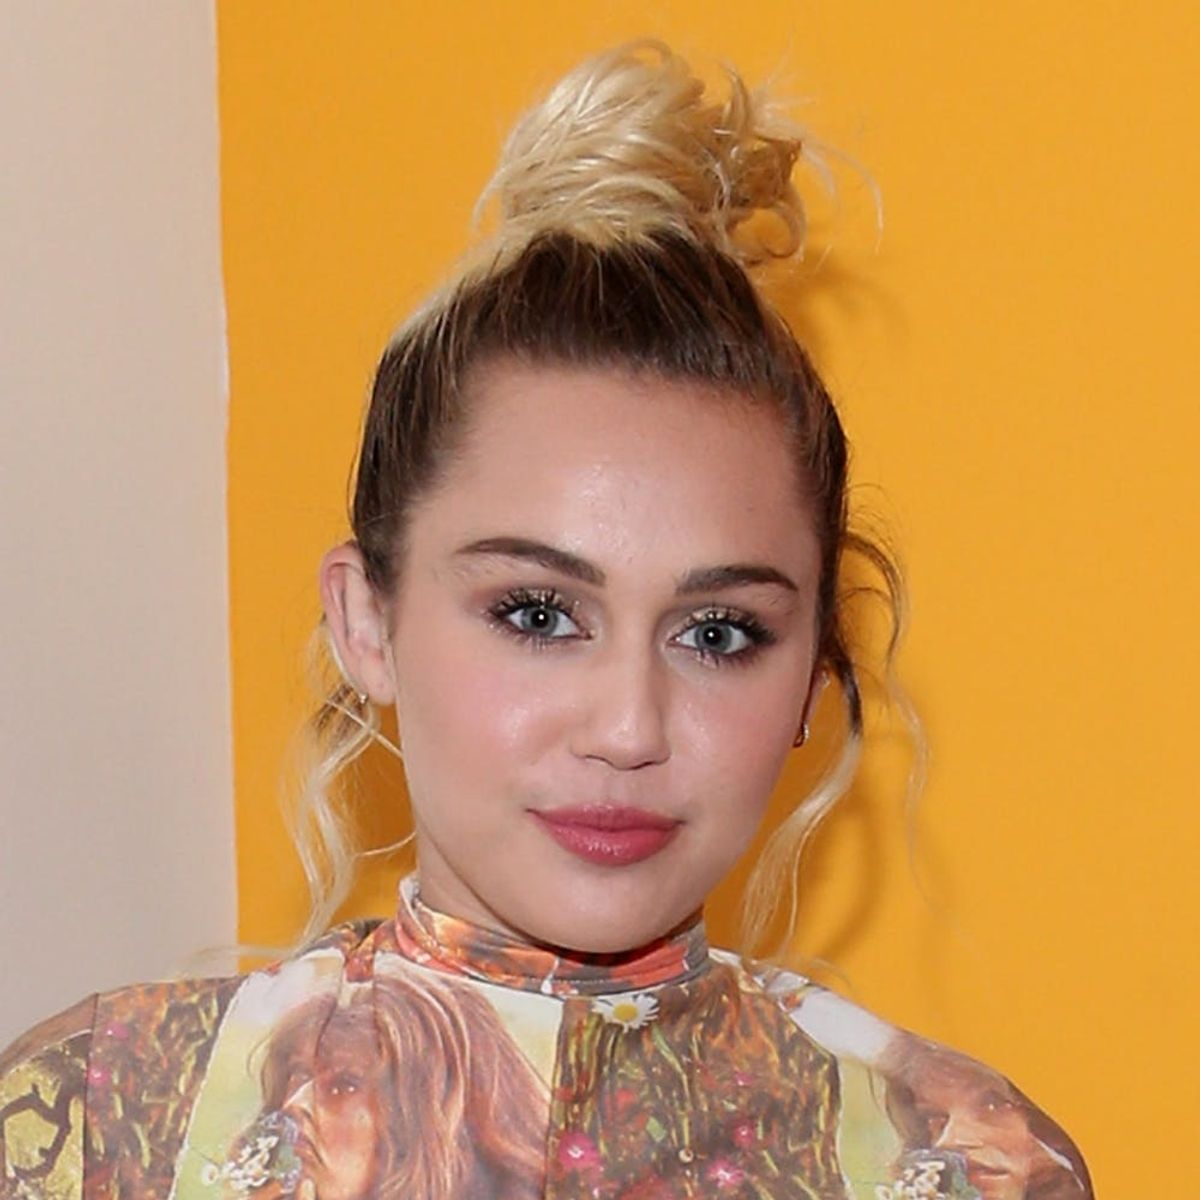 Miley Cyrus Is Responding to Upset Fans After Making Controversial Comments About Hip-Hop